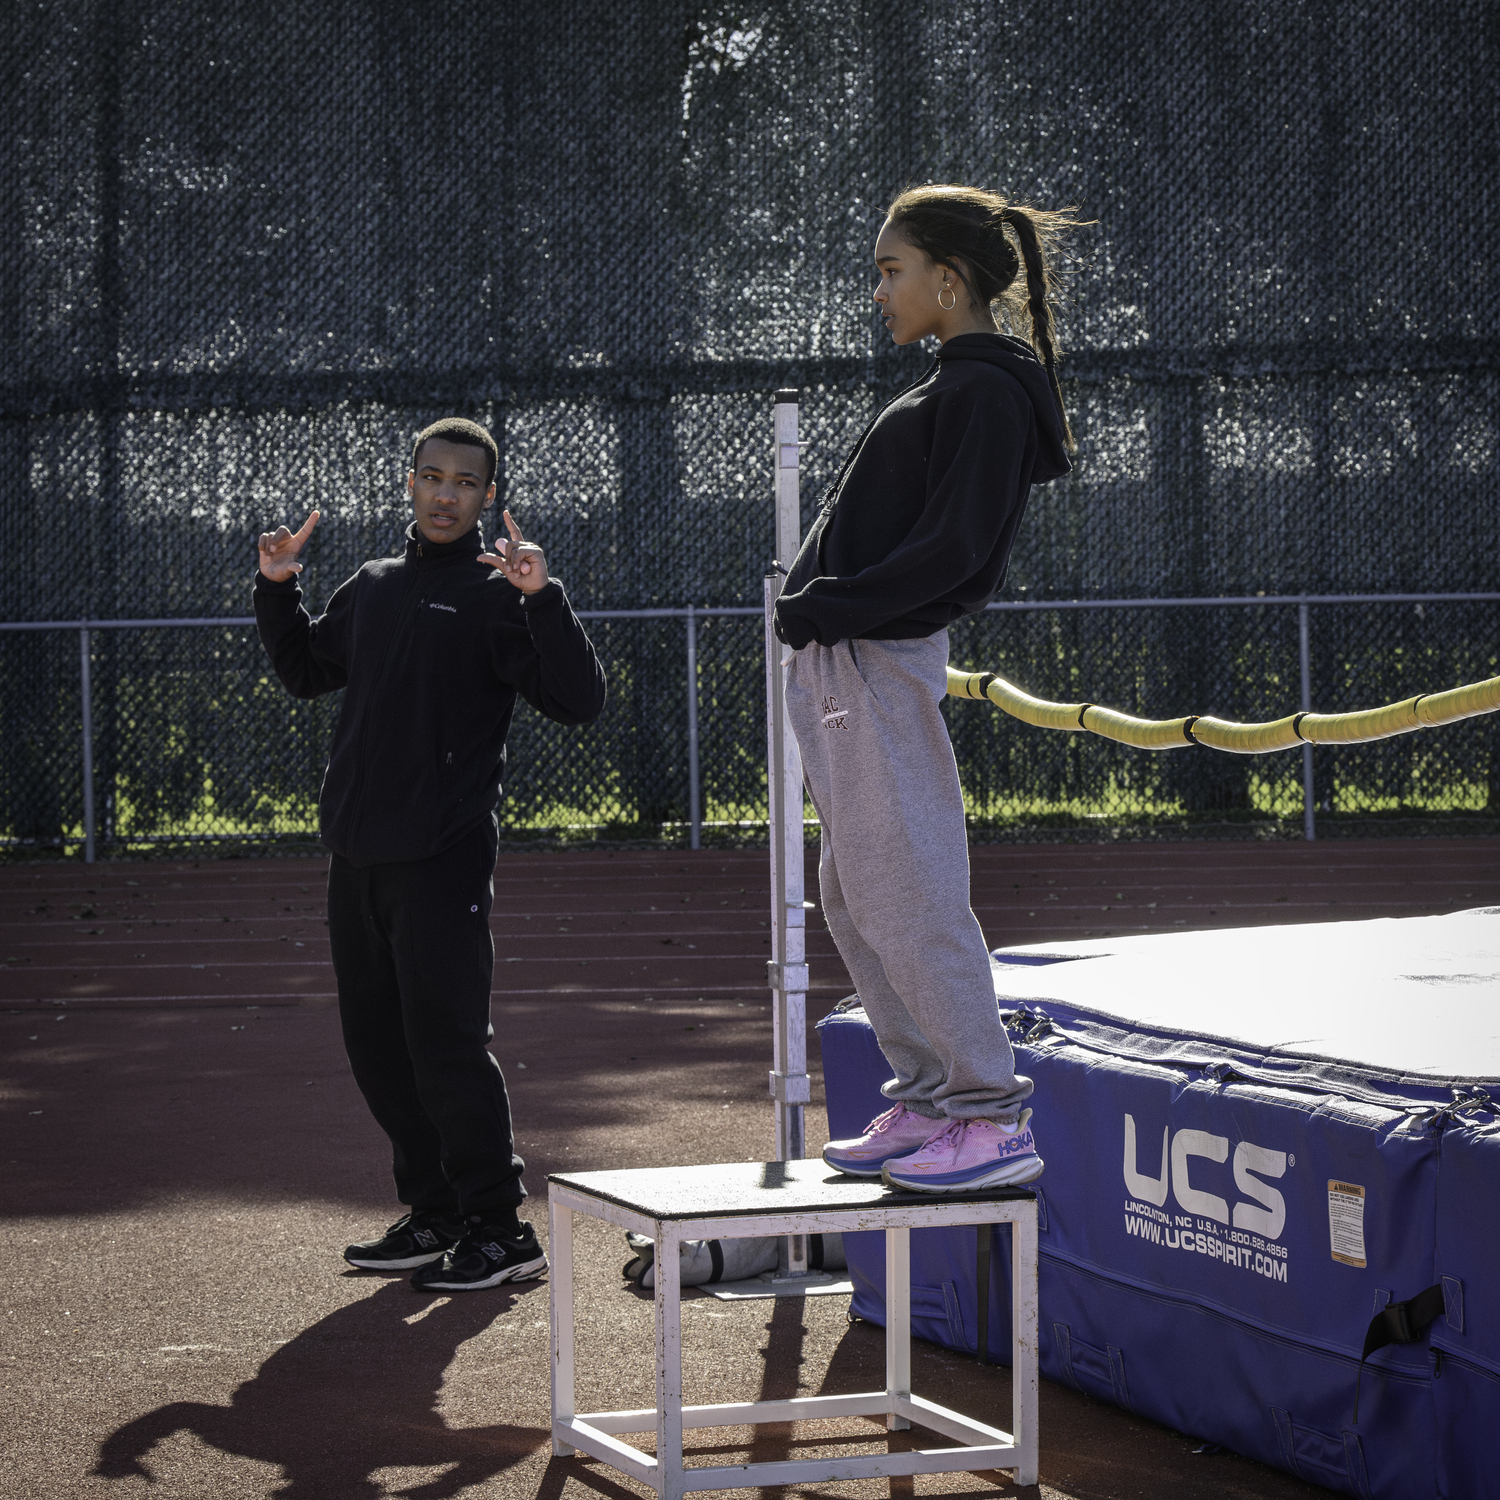 Mikhail Feaster gives some tips on performing the high jump.   MARIANNE BARNETT